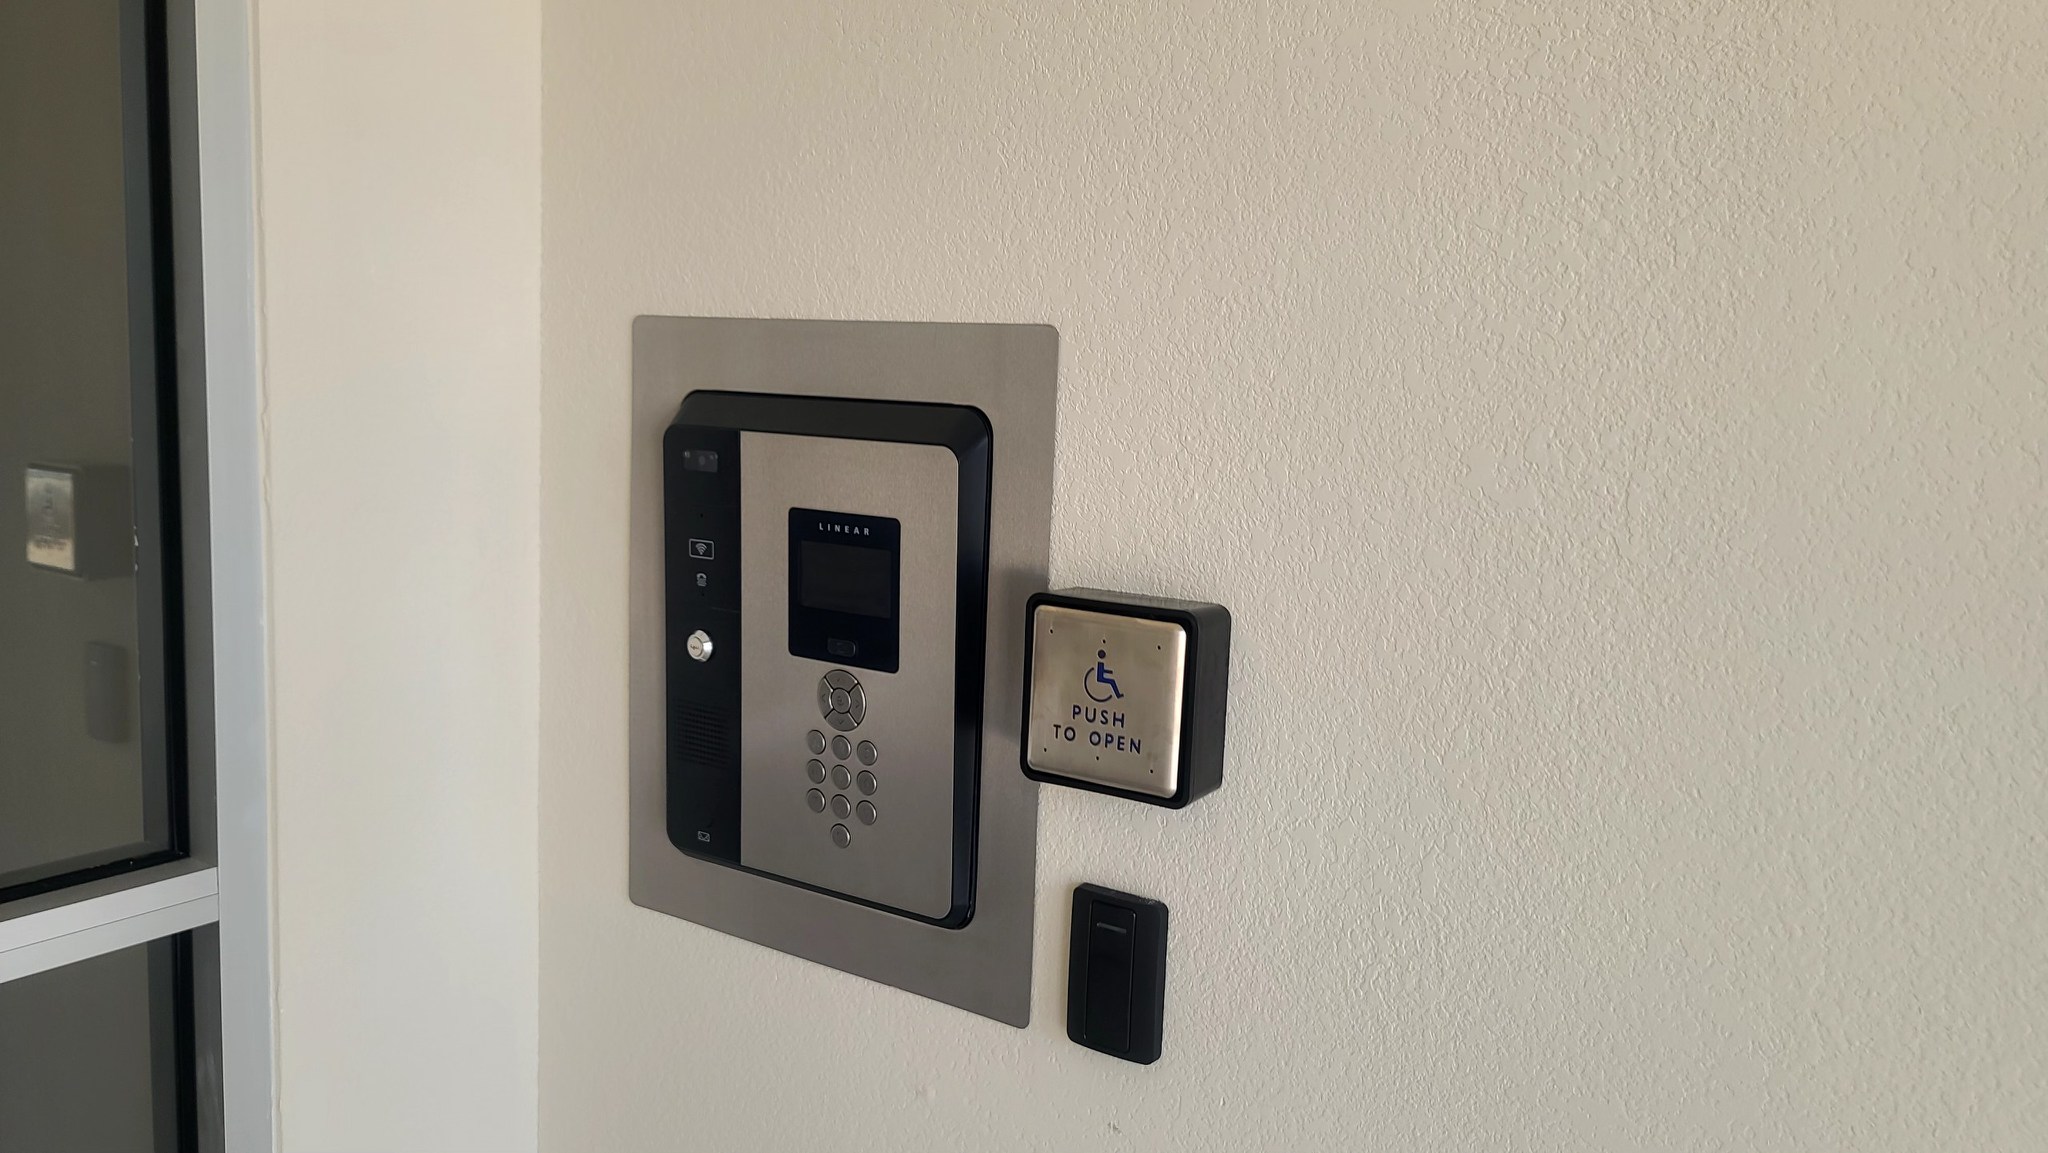 Arlington's top choice for access controls, telephone entry systems, automatic gates, and video surveillance, including  cameras, CCTV, DVR, NVR, and monitoring services! We help secure all types of buildings including commercial buildings, government and educational facilities, multi family living complexes, hoa's, senior living facilities, and more!  Contact us today!